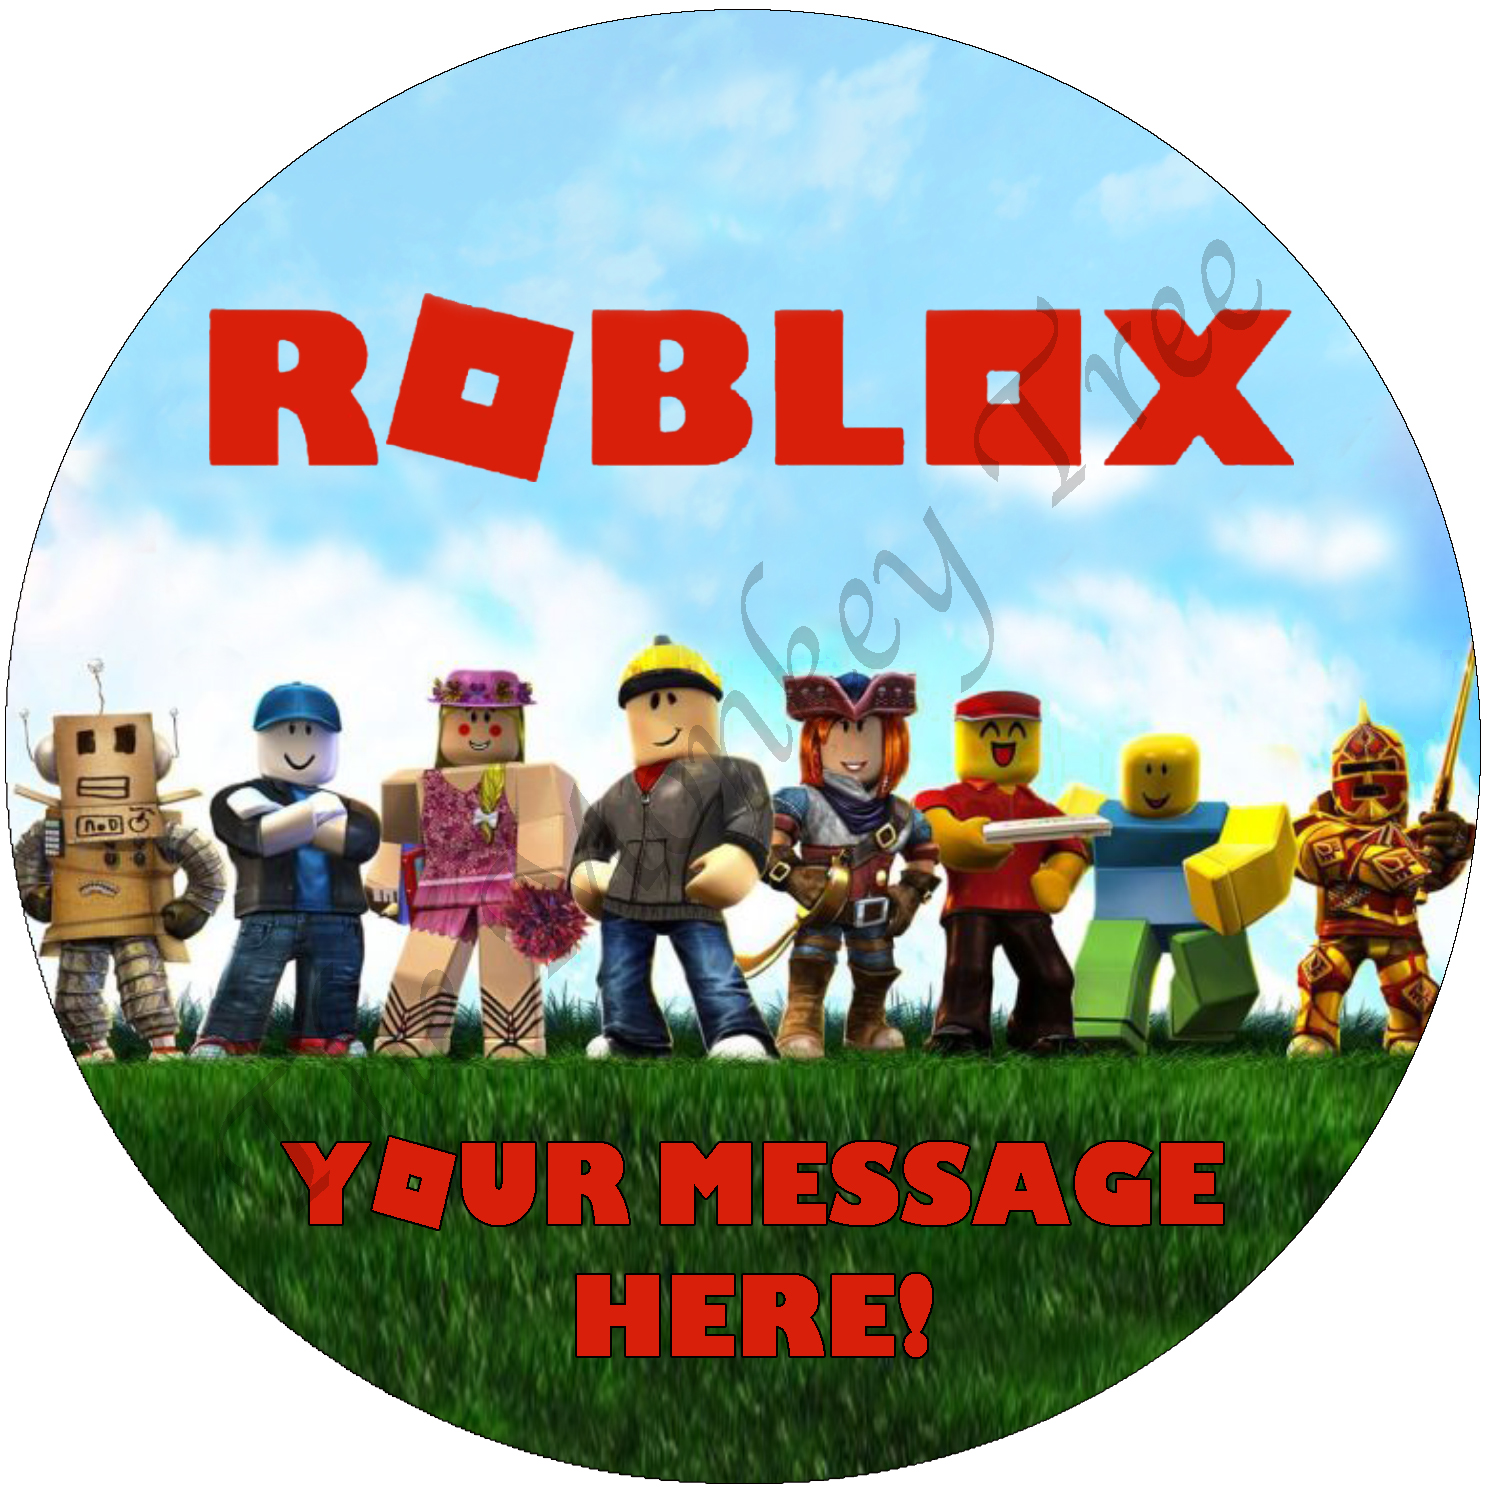 Roblox Fondant Edible Cake Topper Personalised The Monkey Tree - roblox cupcake toppers in 2019 lego birthday party roblox